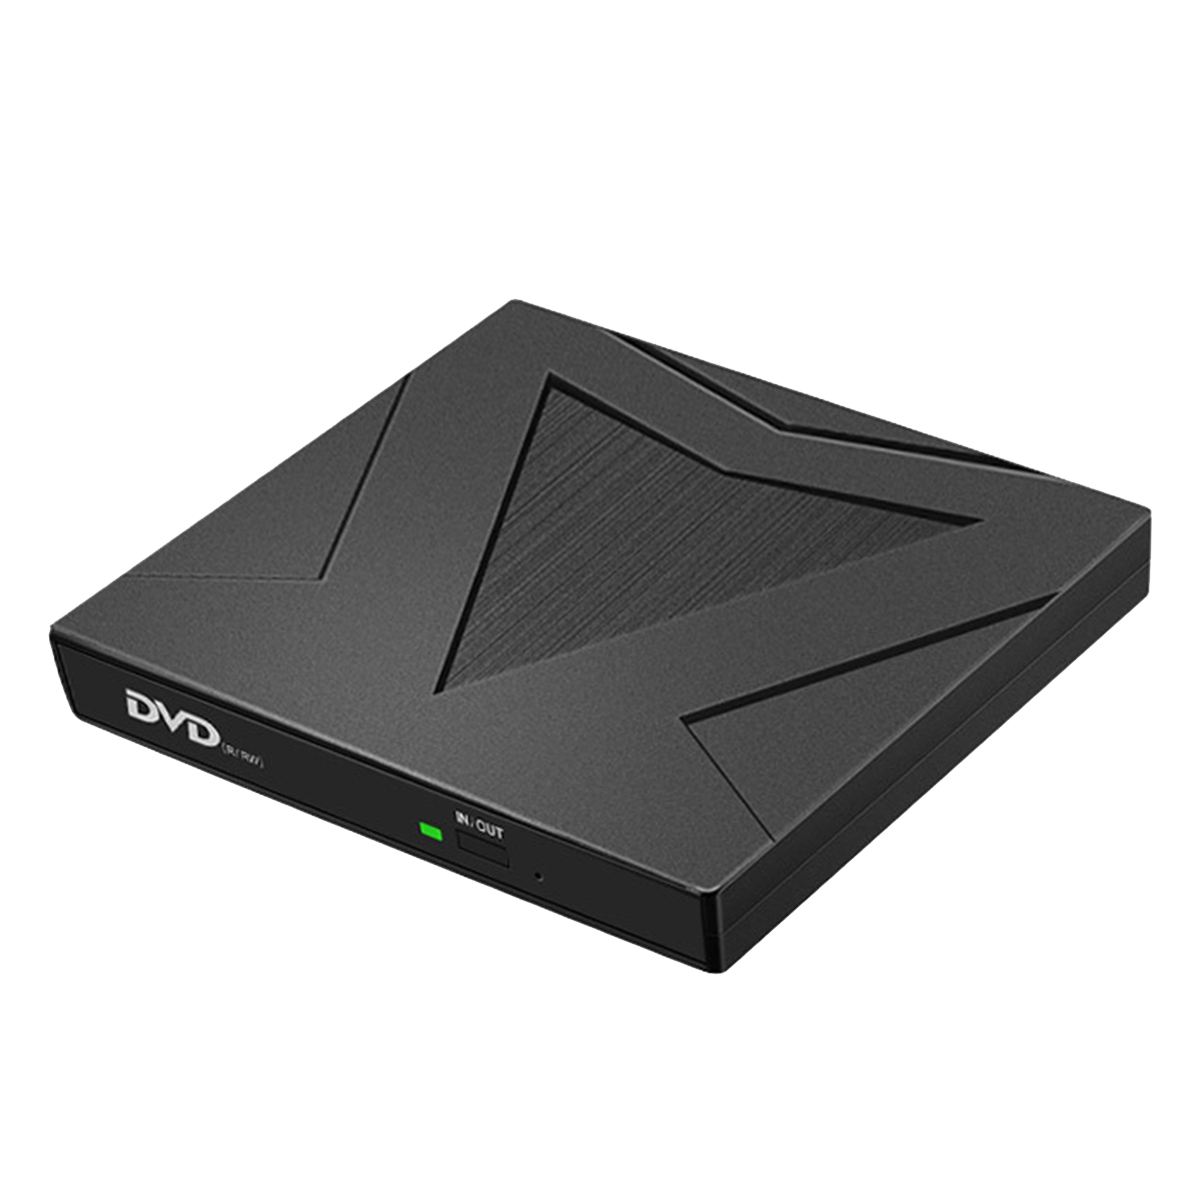 Find USB3 0 Type C External CD DVD Optical Drive High Speed Data Transfer External DVD RW Player External Burner Writer Rewriter for Computer PC Laptop XD012 for Sale on Gipsybee.com with cryptocurrencies